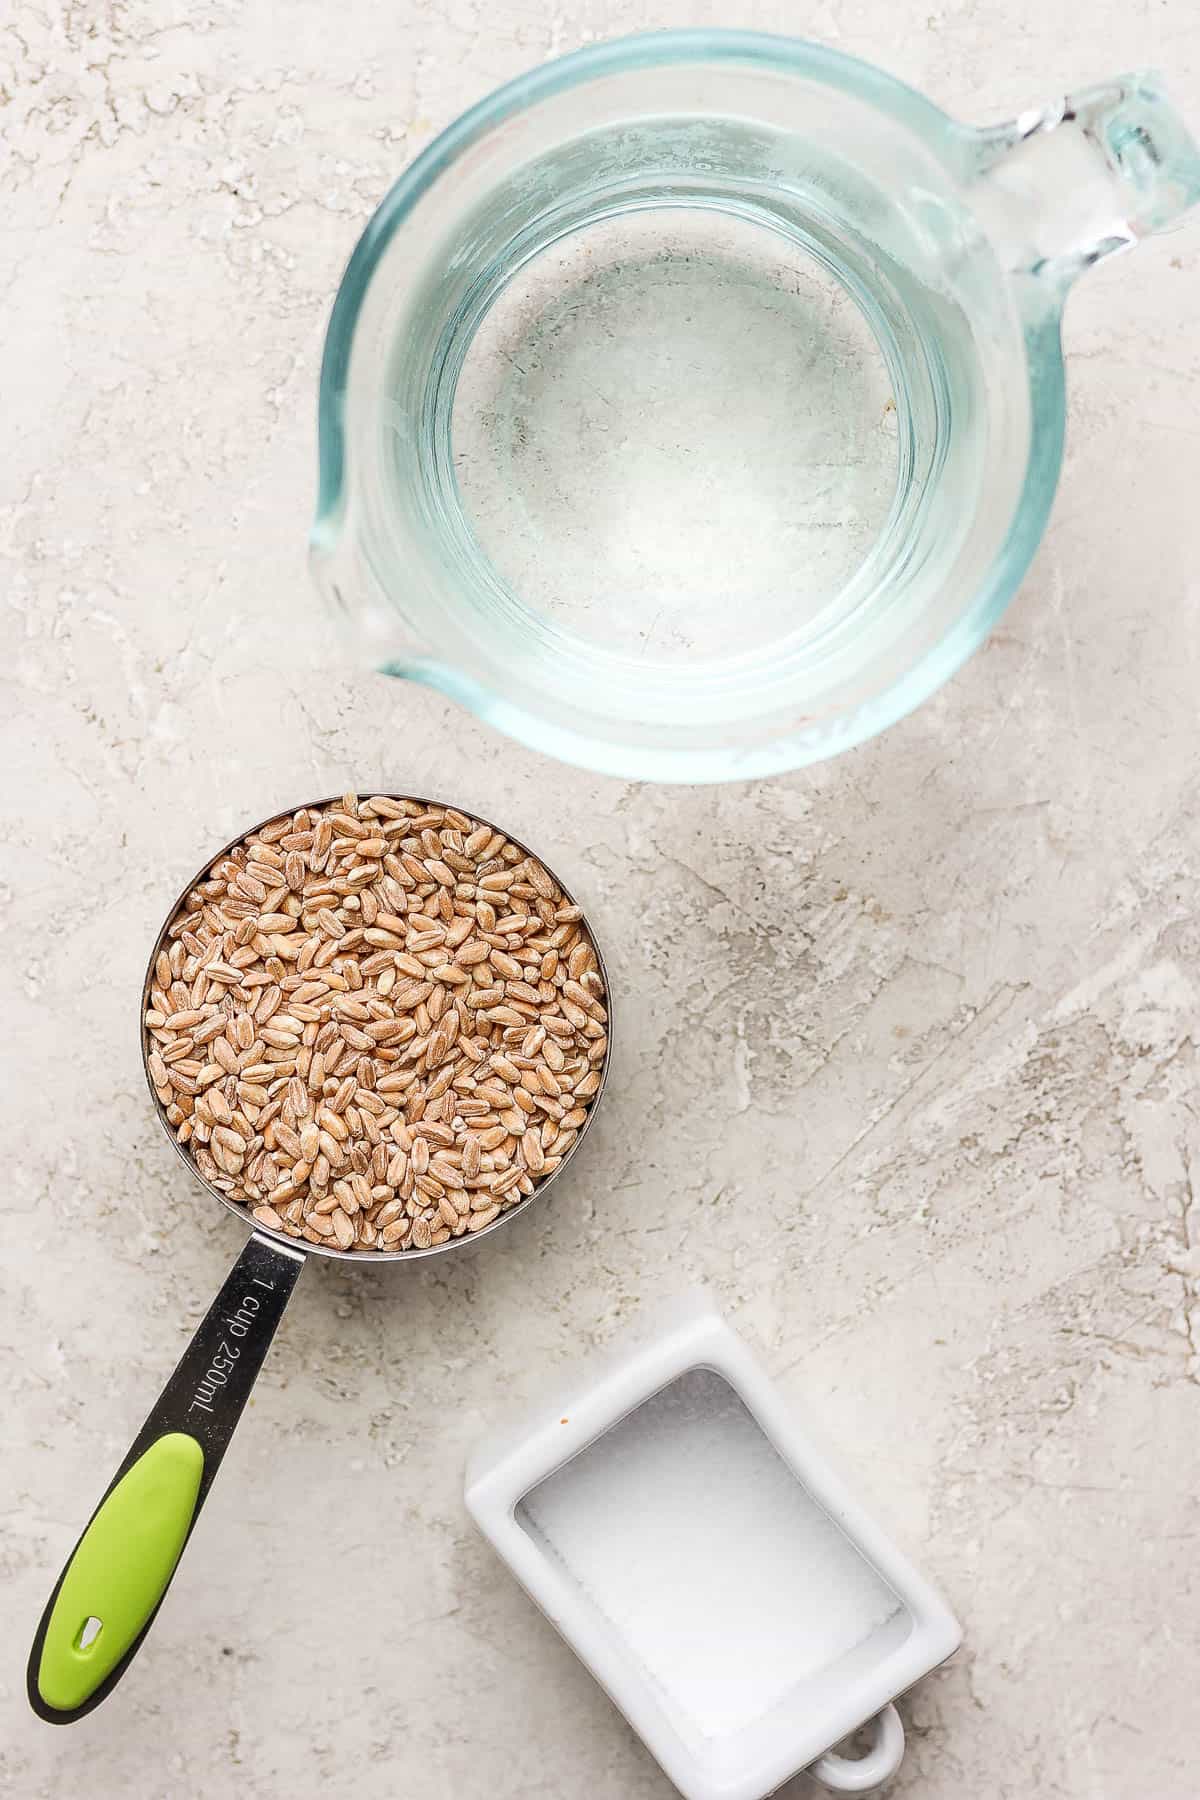 Water, farro, and salt in separate containers.